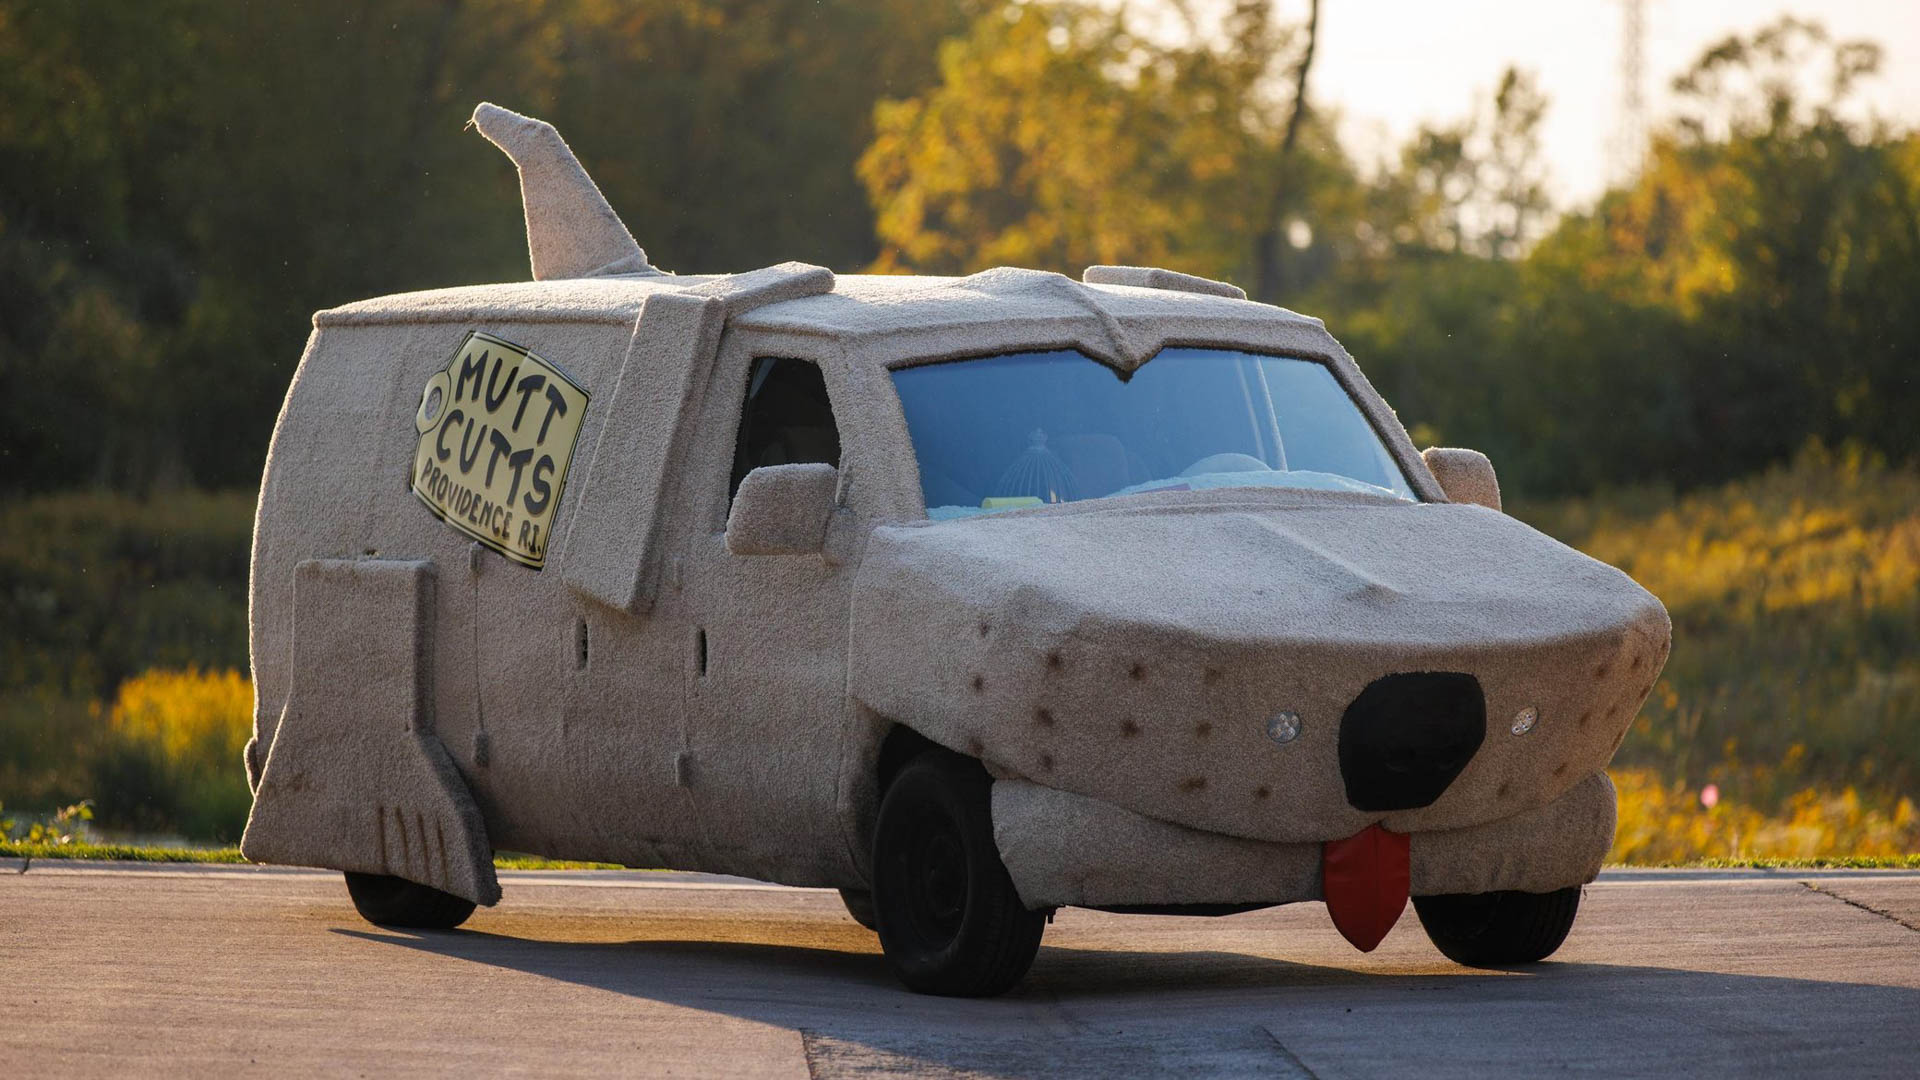 ‘Dumb & Dumber’ Dog Van for Sale Is a Replica But It’d Still Be a Fun Daily